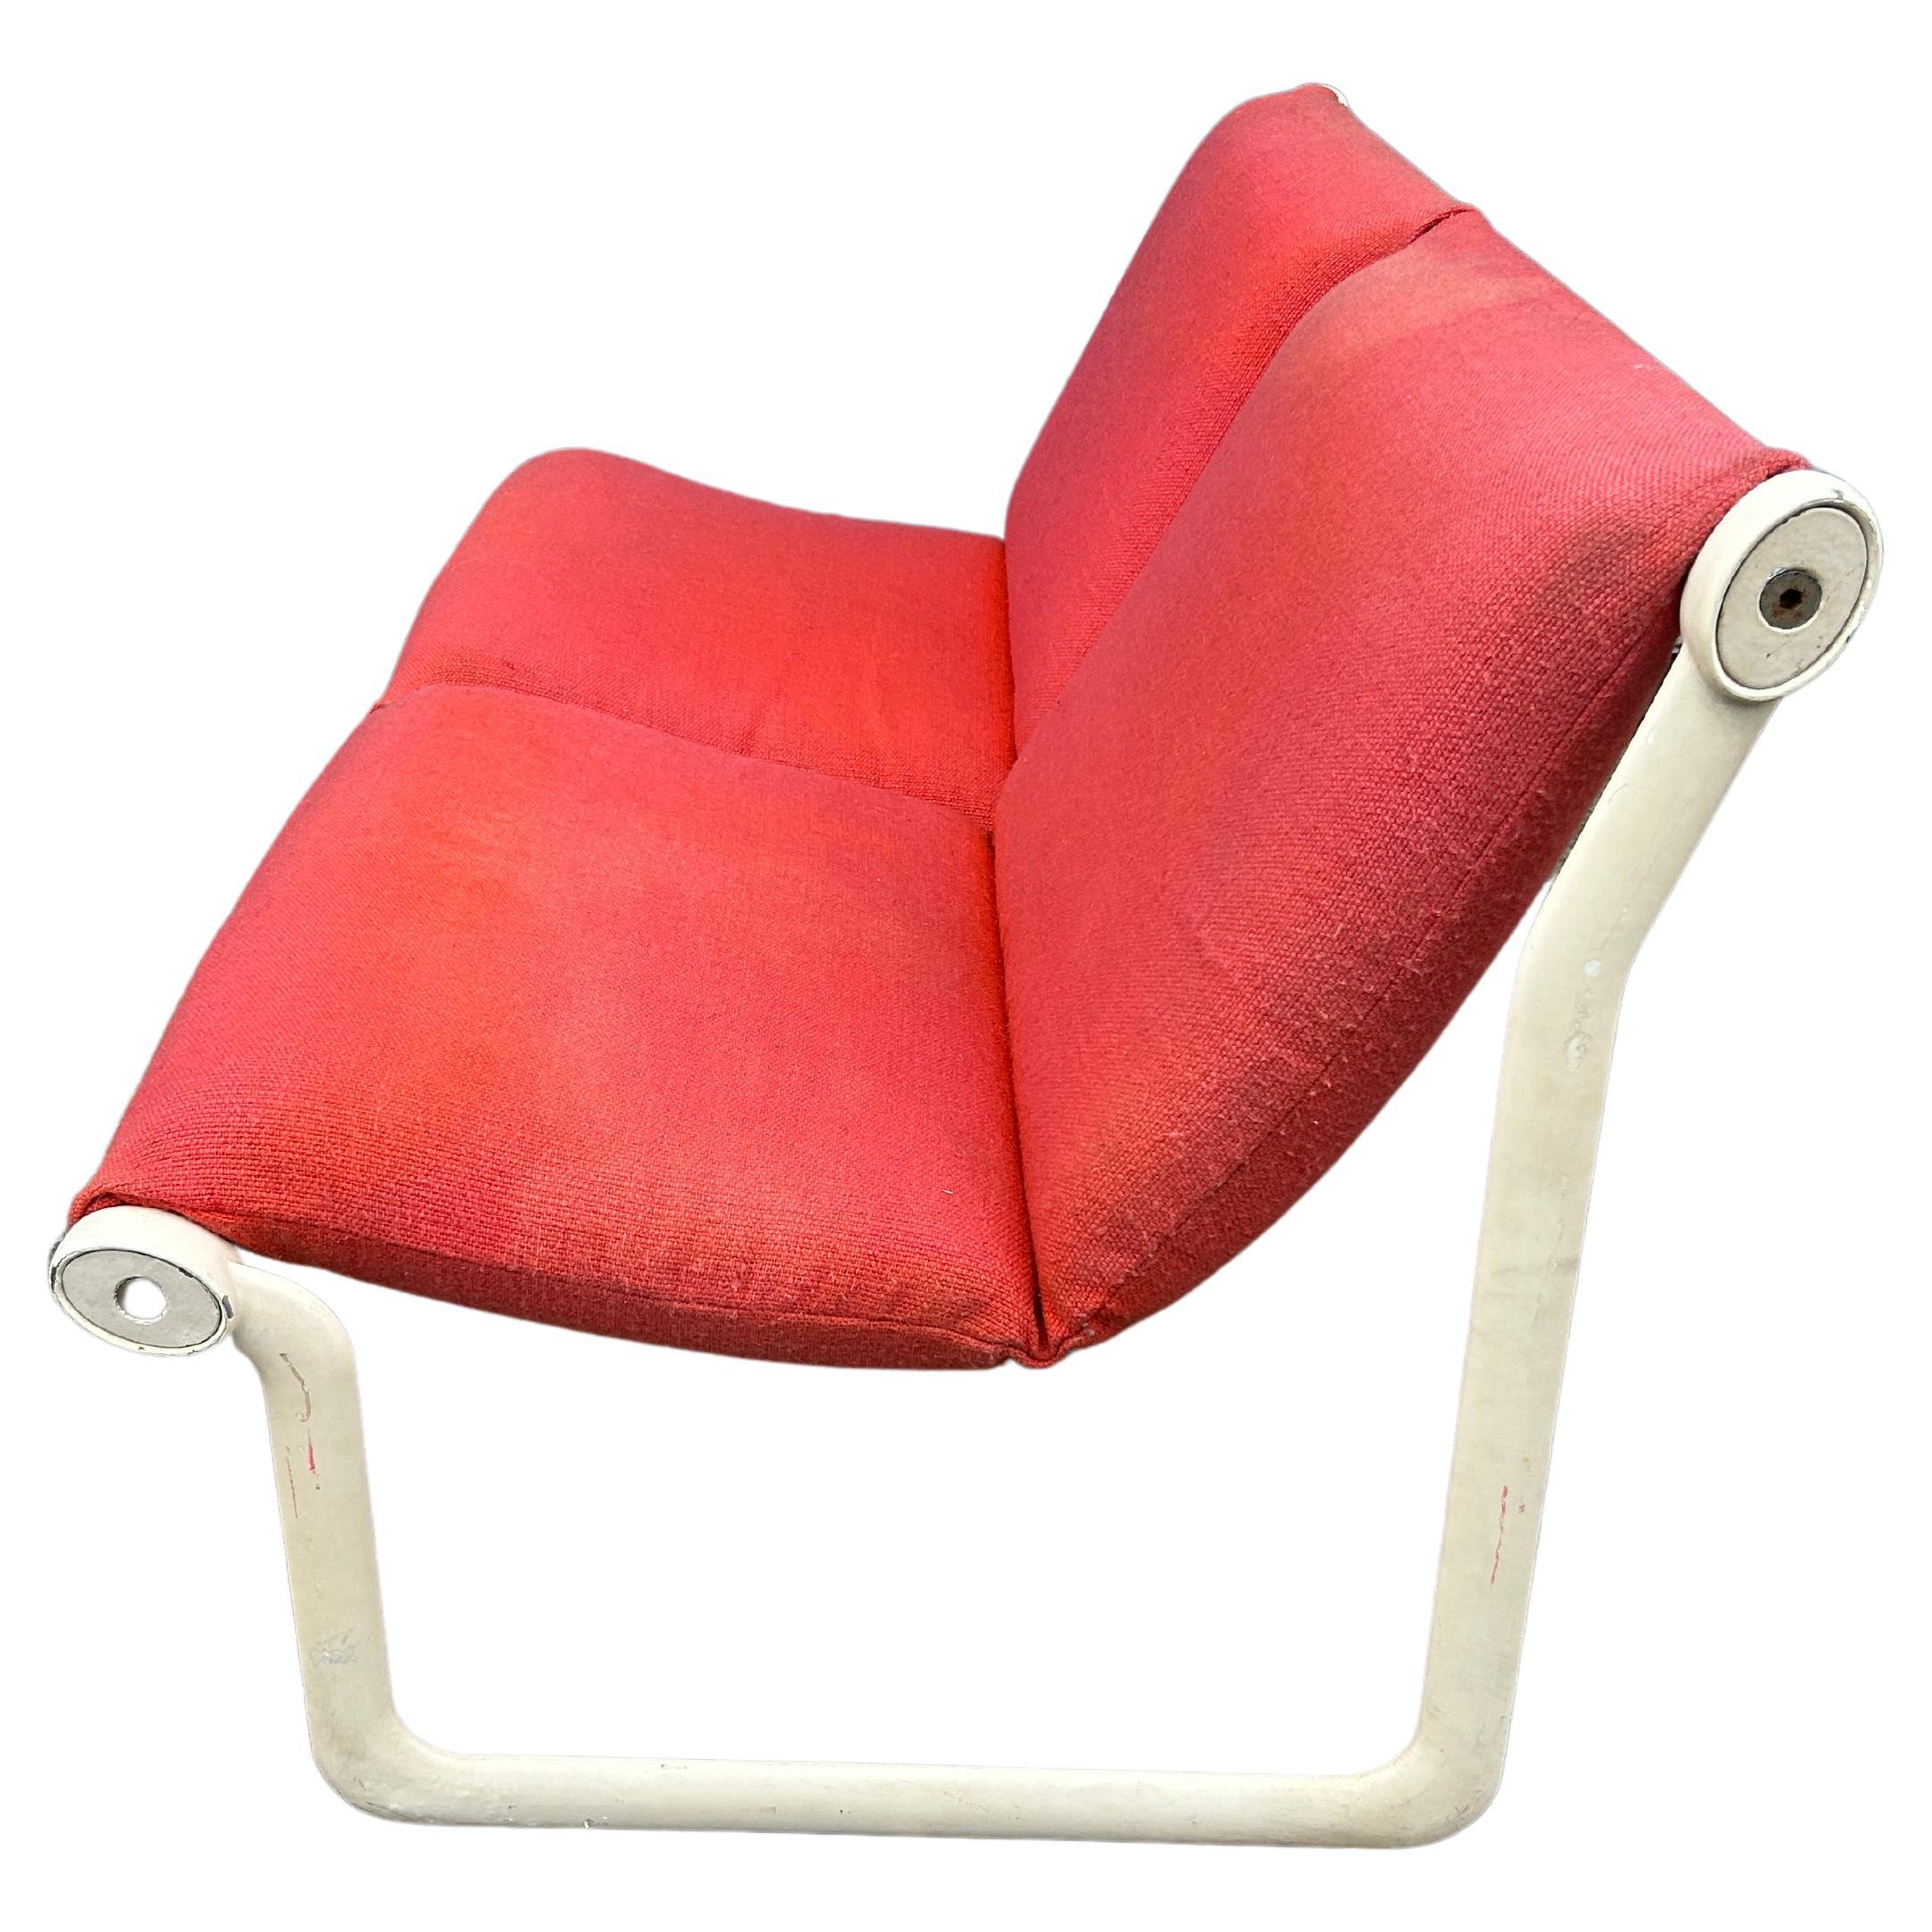 Mid Century Modern 2 Seat sofa by Bruce Hannah and Andrew Morrison for Knoll. Made in American circa 1960s. Designed by Bruce Hannah and Andrew Morrison for Knoll International in original red upholstery slung on white enamel Aluminum frames.